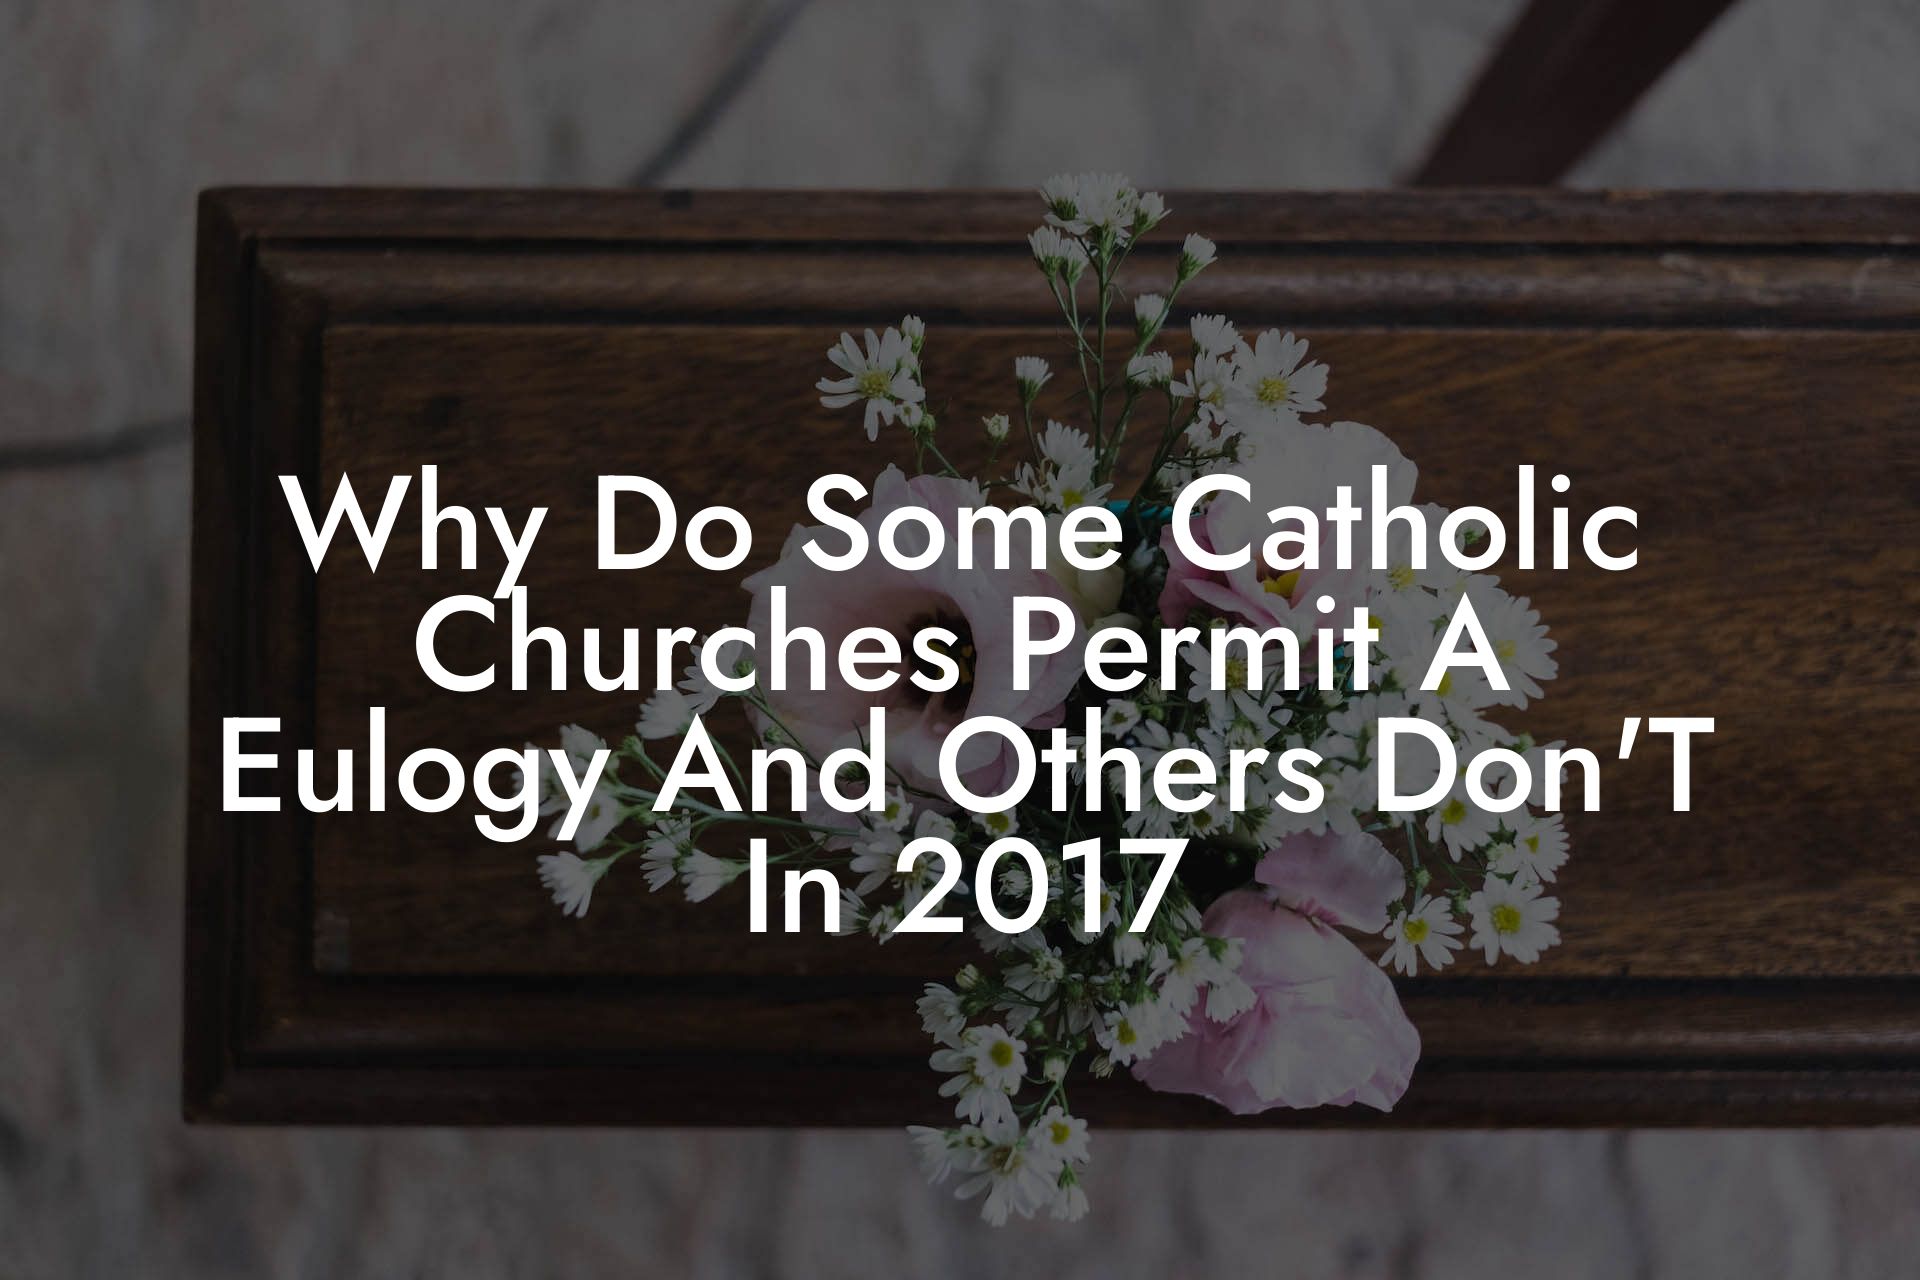 Why Do Some Catholic Churches Permit A Eulogy And Others Don'T In 2017